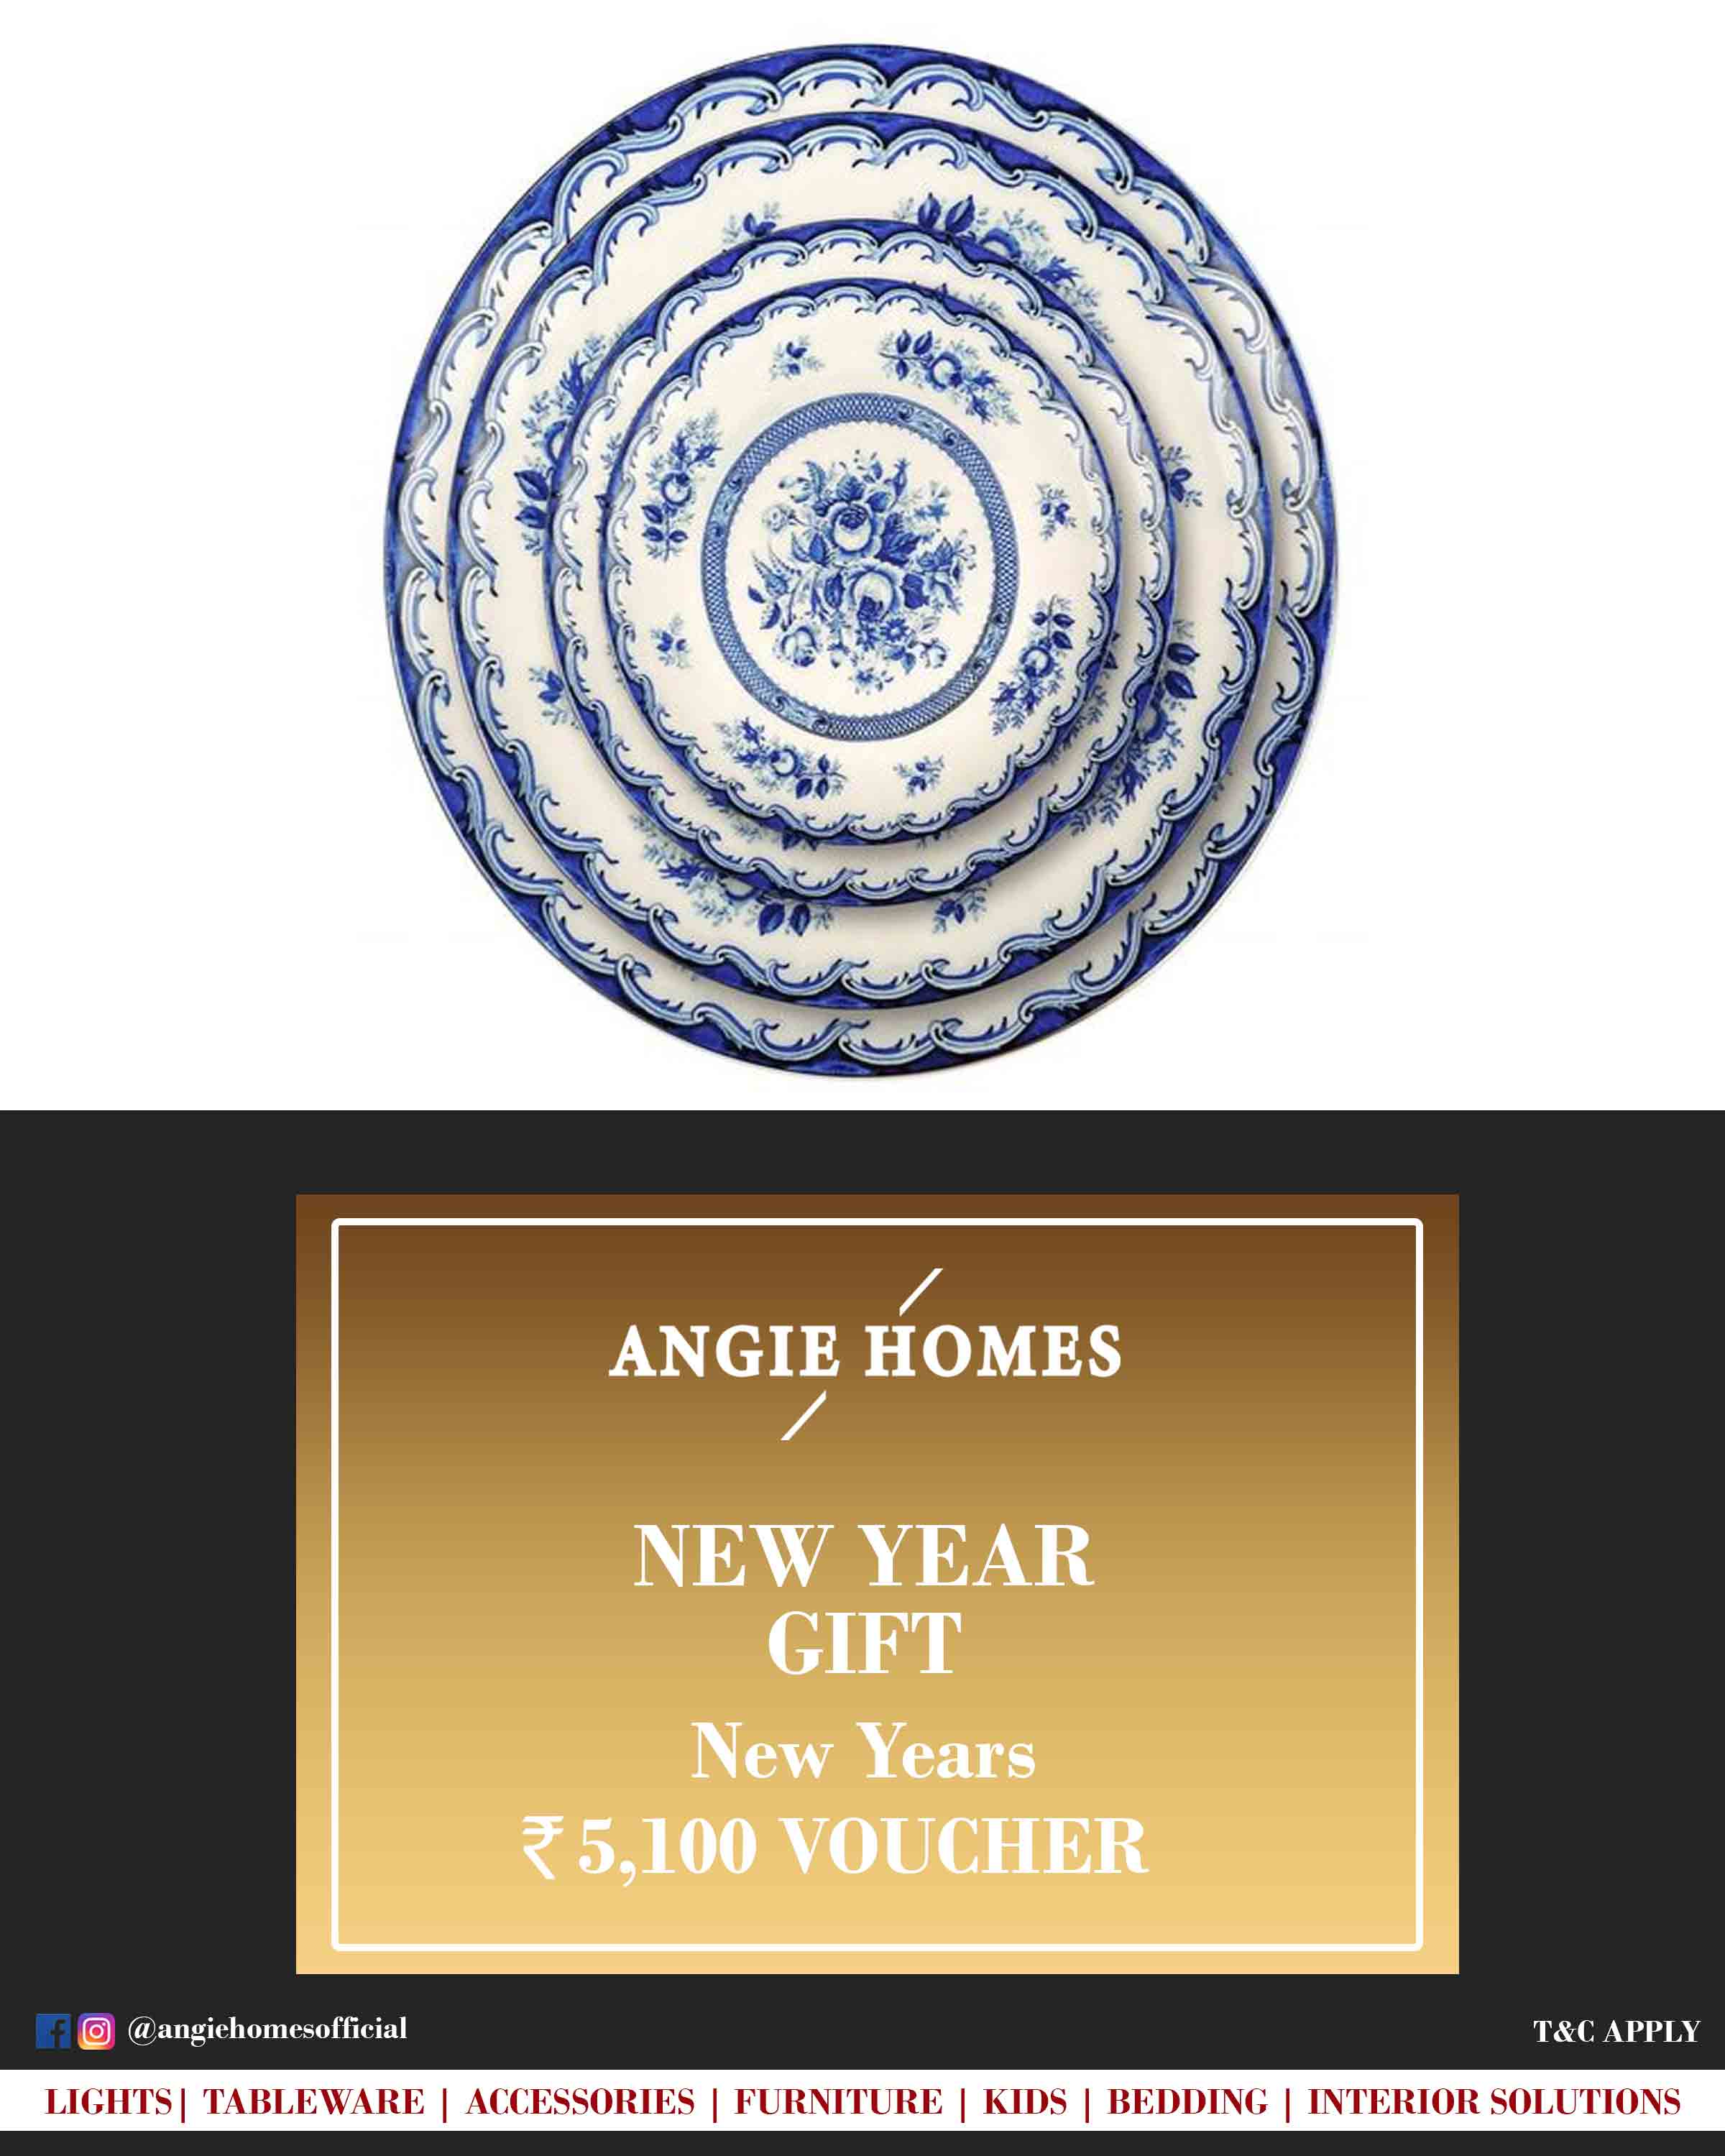 Online New Year Gift Voucher for Tableware | Bone China Plate ANGIE HOMES